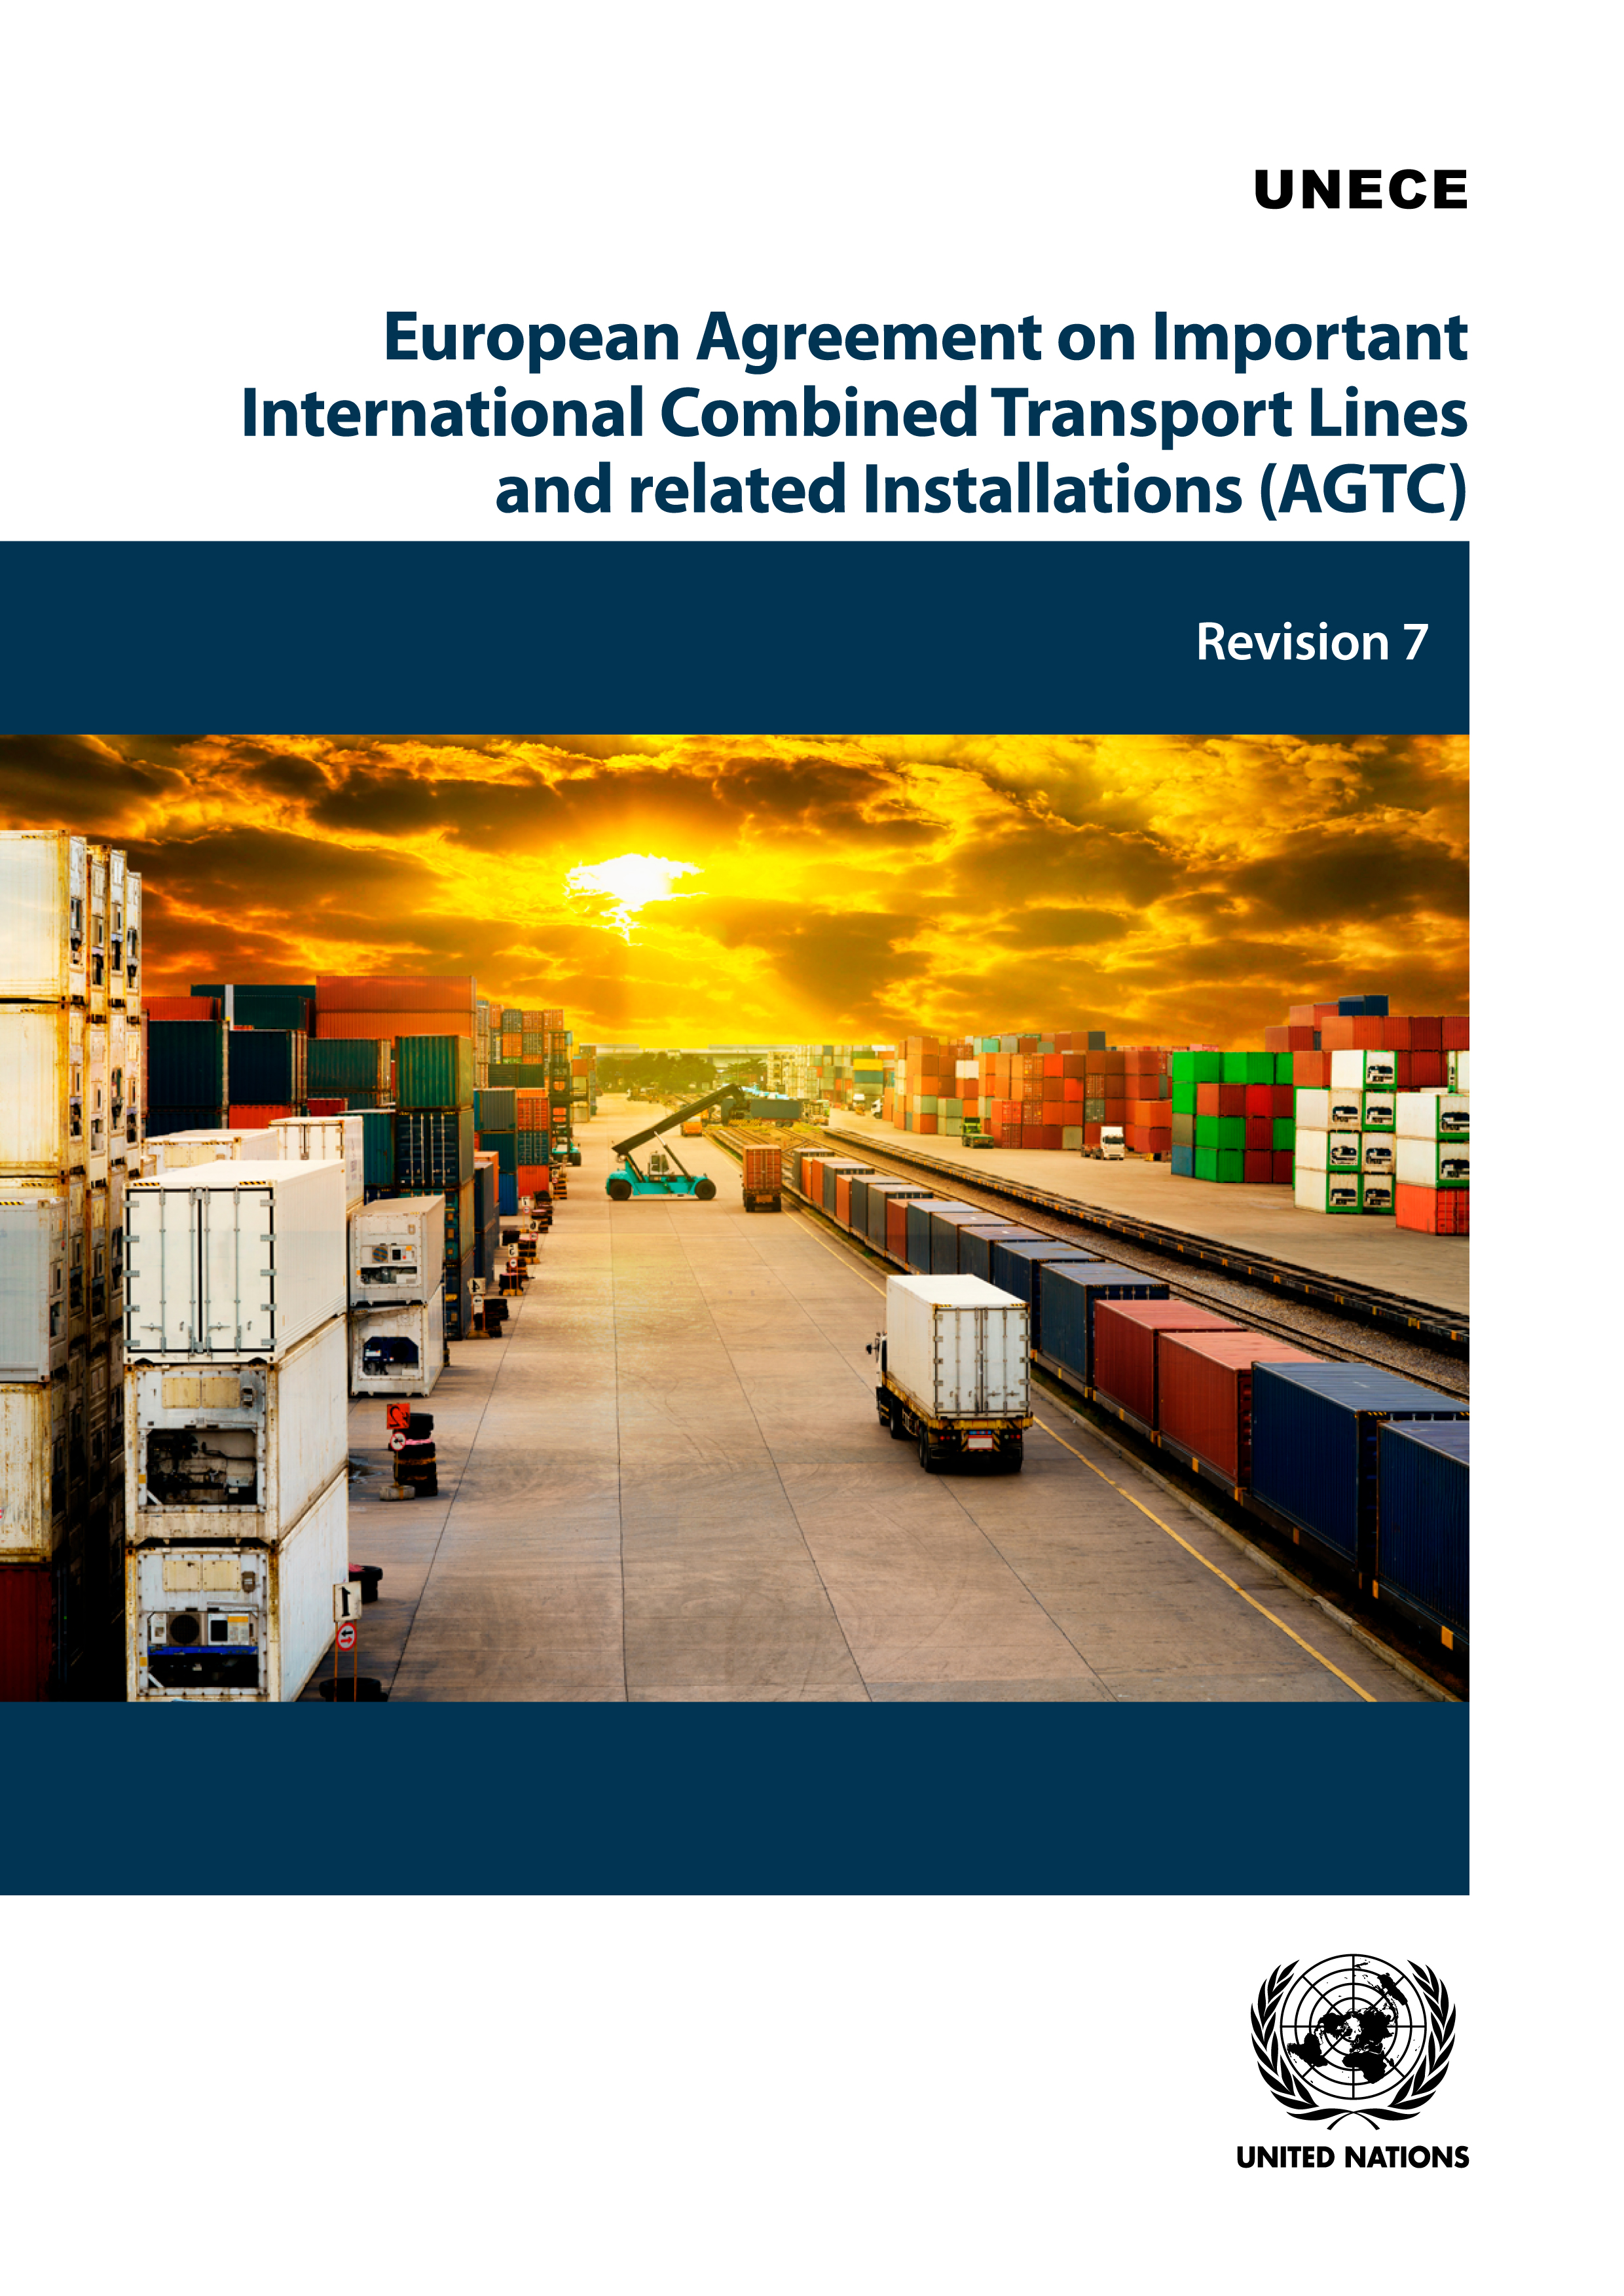 image of Installations important for international combined transport